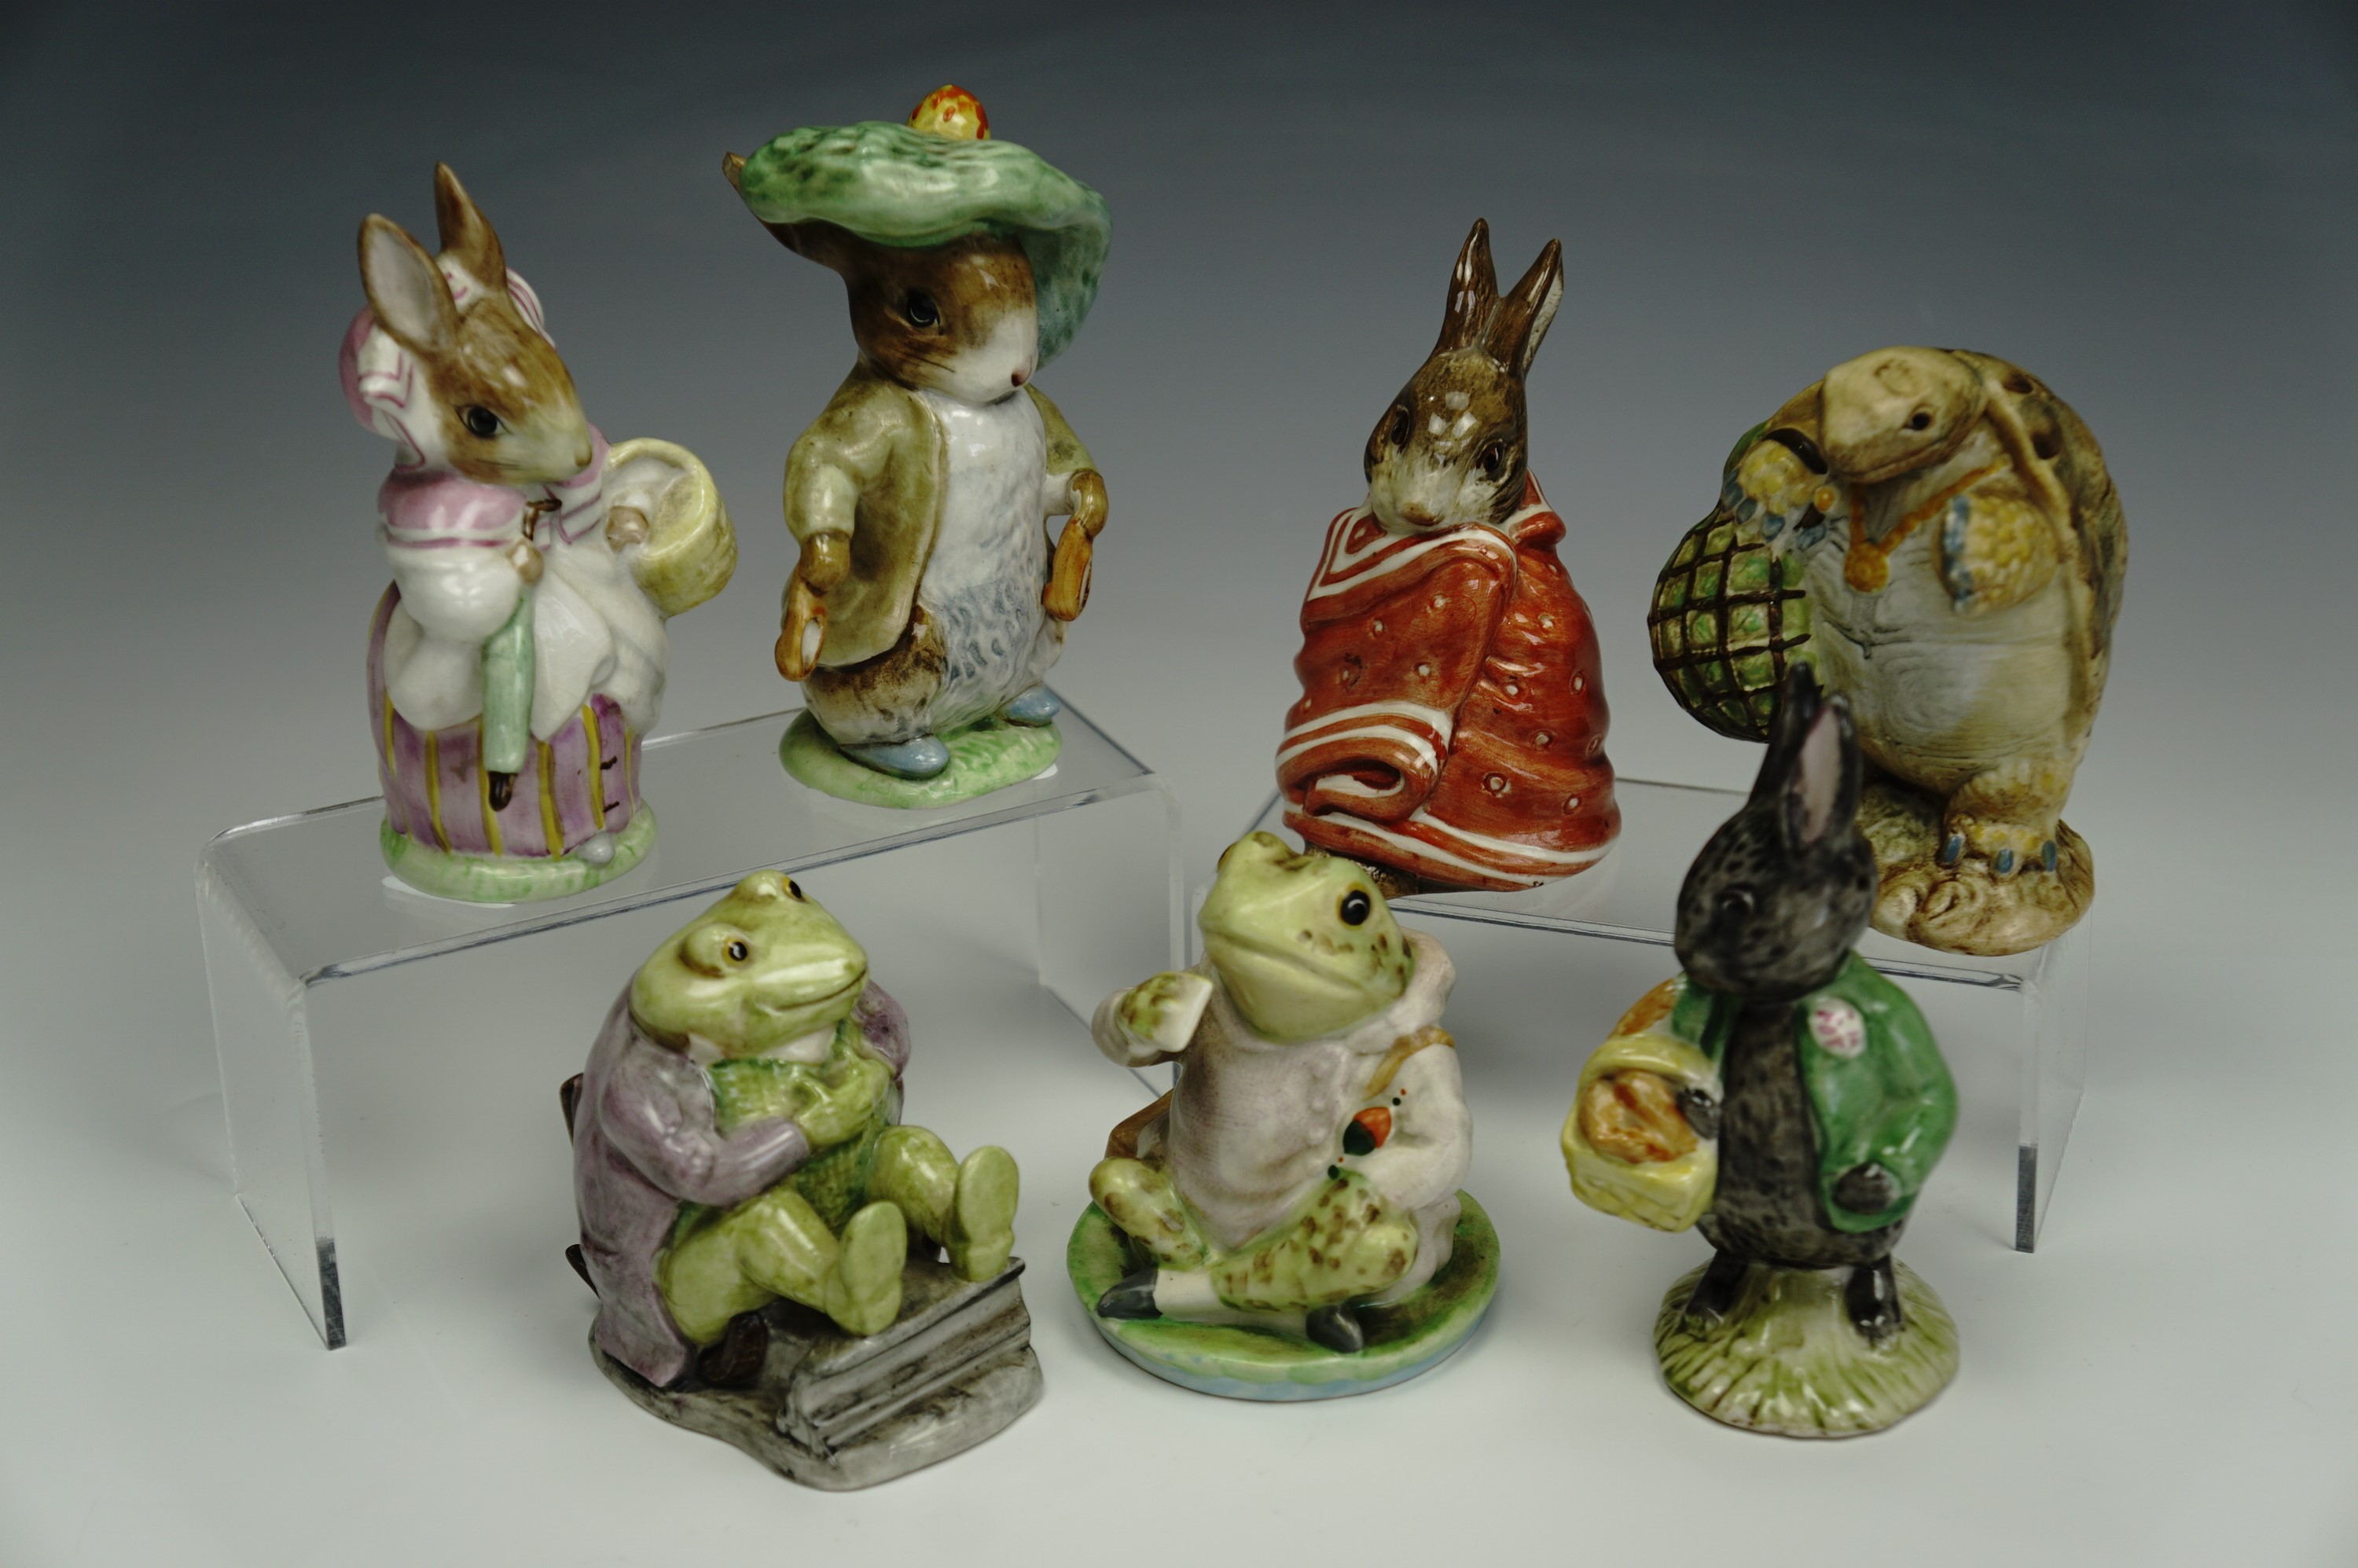 Seven Beswick Beatrix Potter figurines including frogs, tallest 11 cm